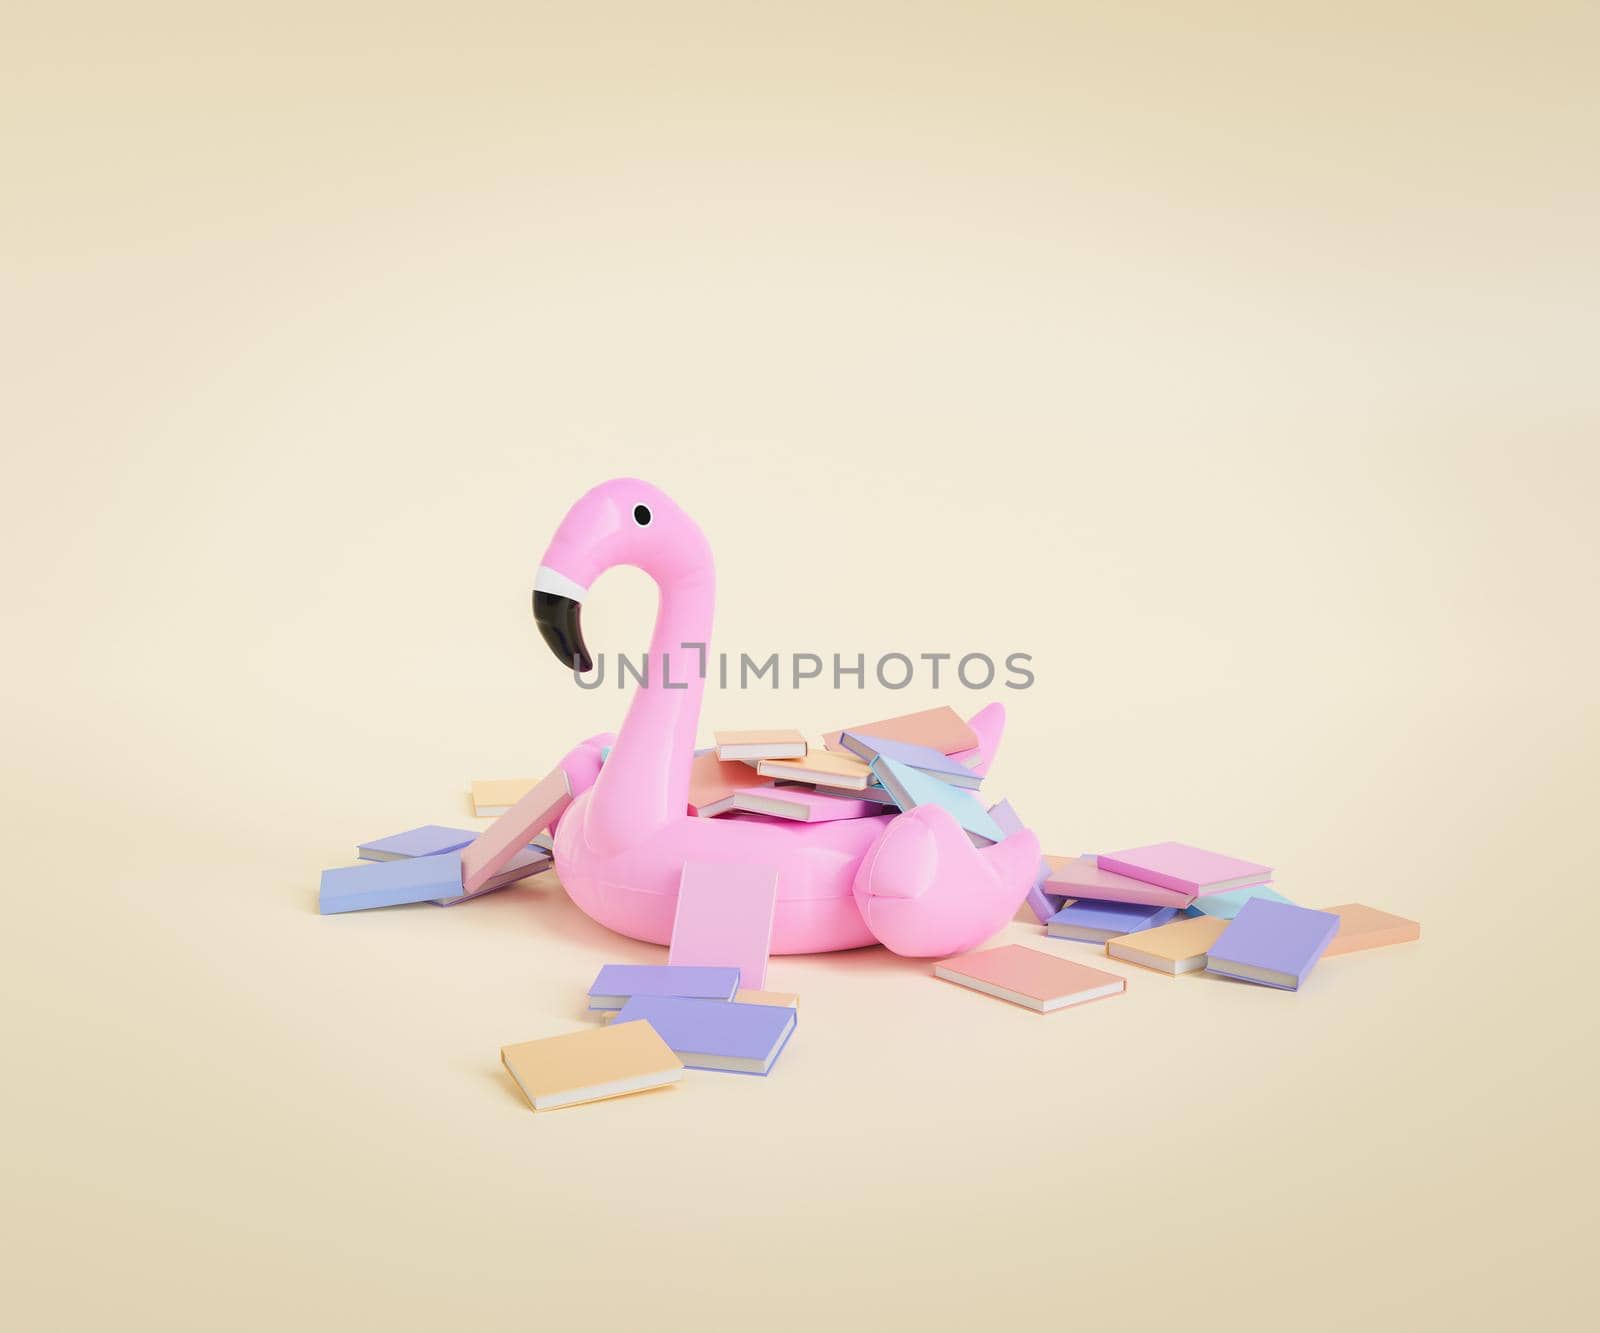 3D rendering of notebooks with colorful covers scattered around pink inflatable flamingo against beige background